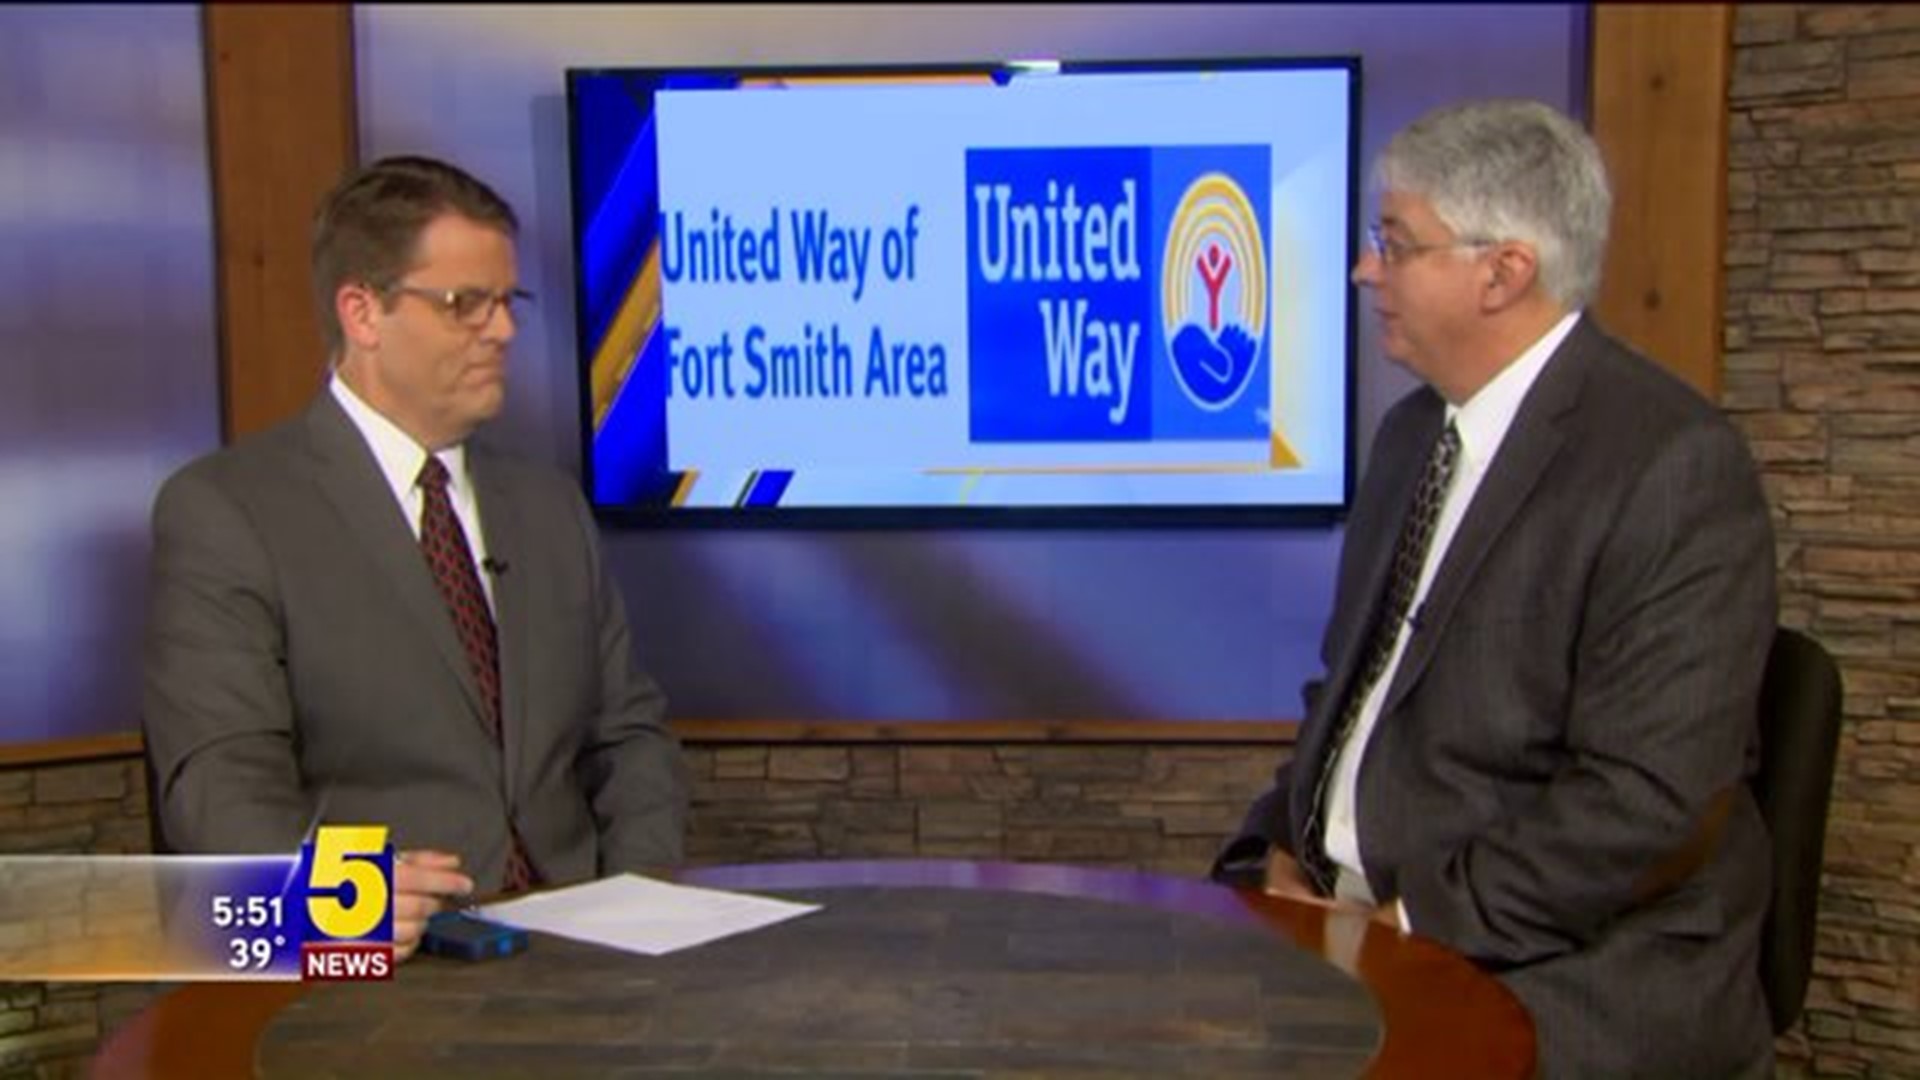 Abilities Unlimited & the United Way of Ft. Smith